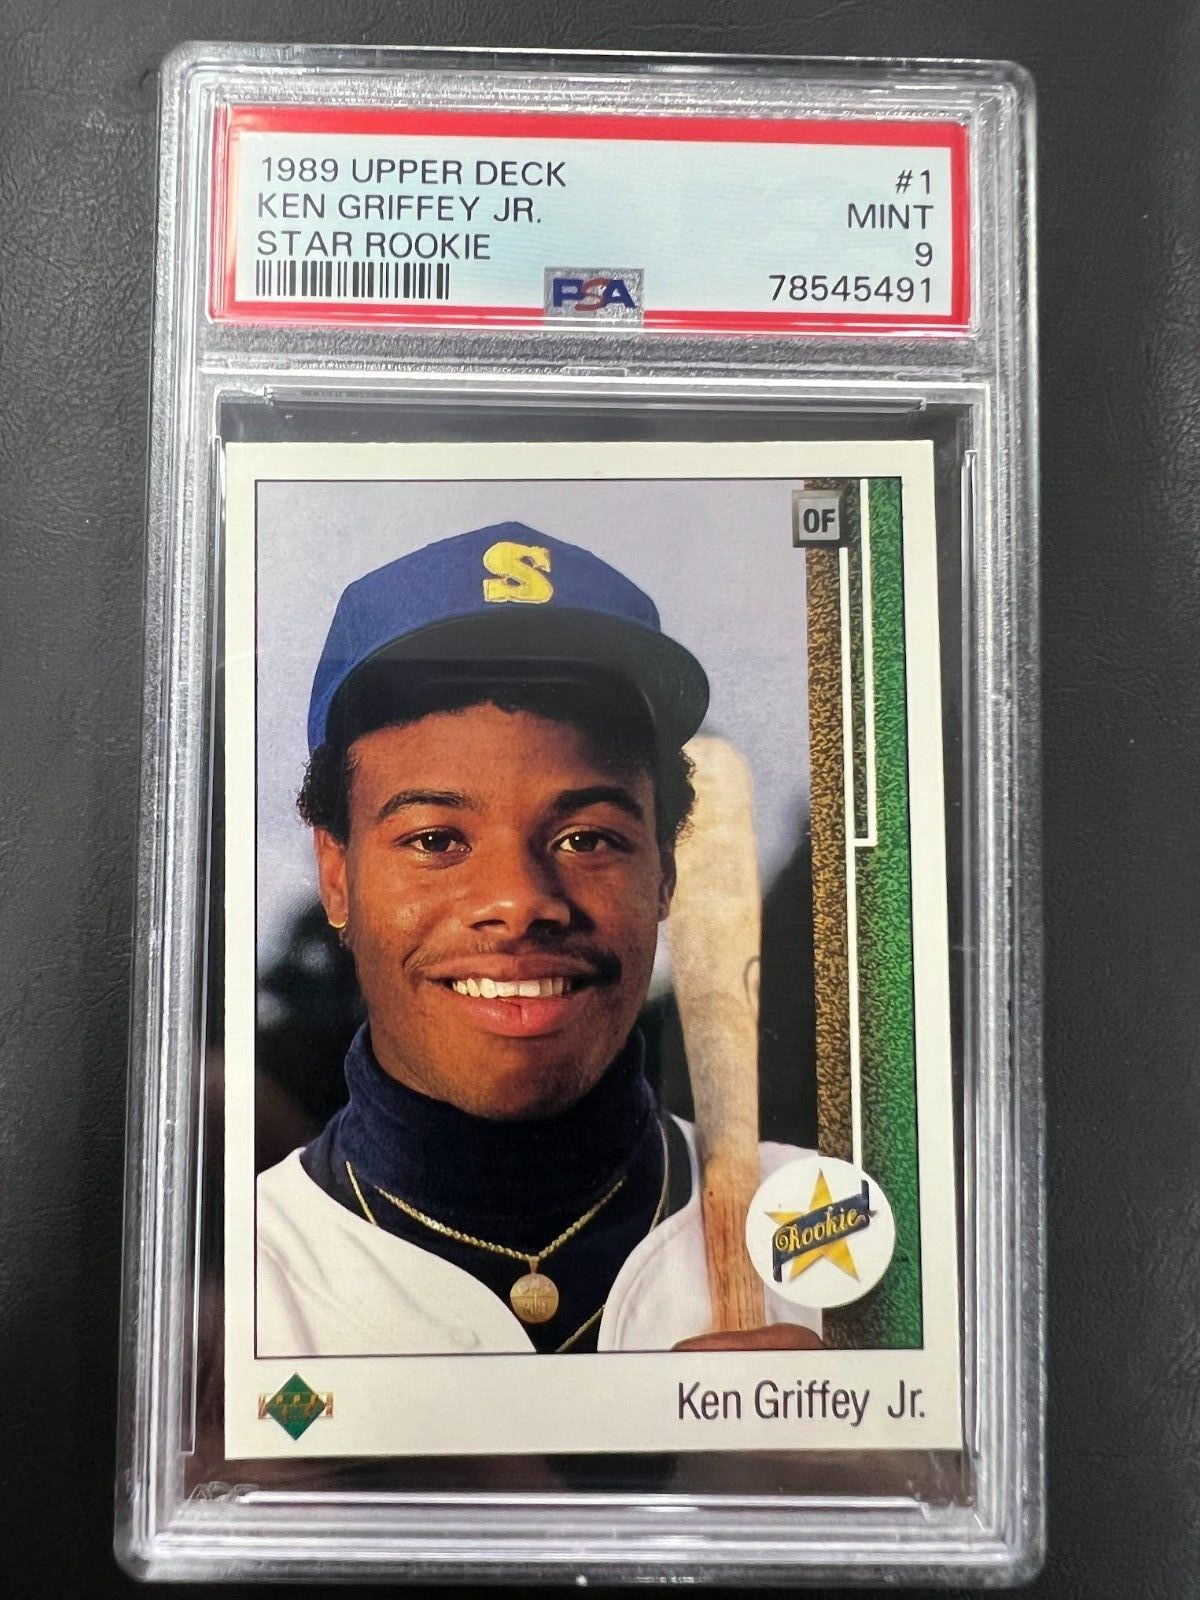 9 things you didn't know about the Ken Griffey Jr. 1989 Upper Deck